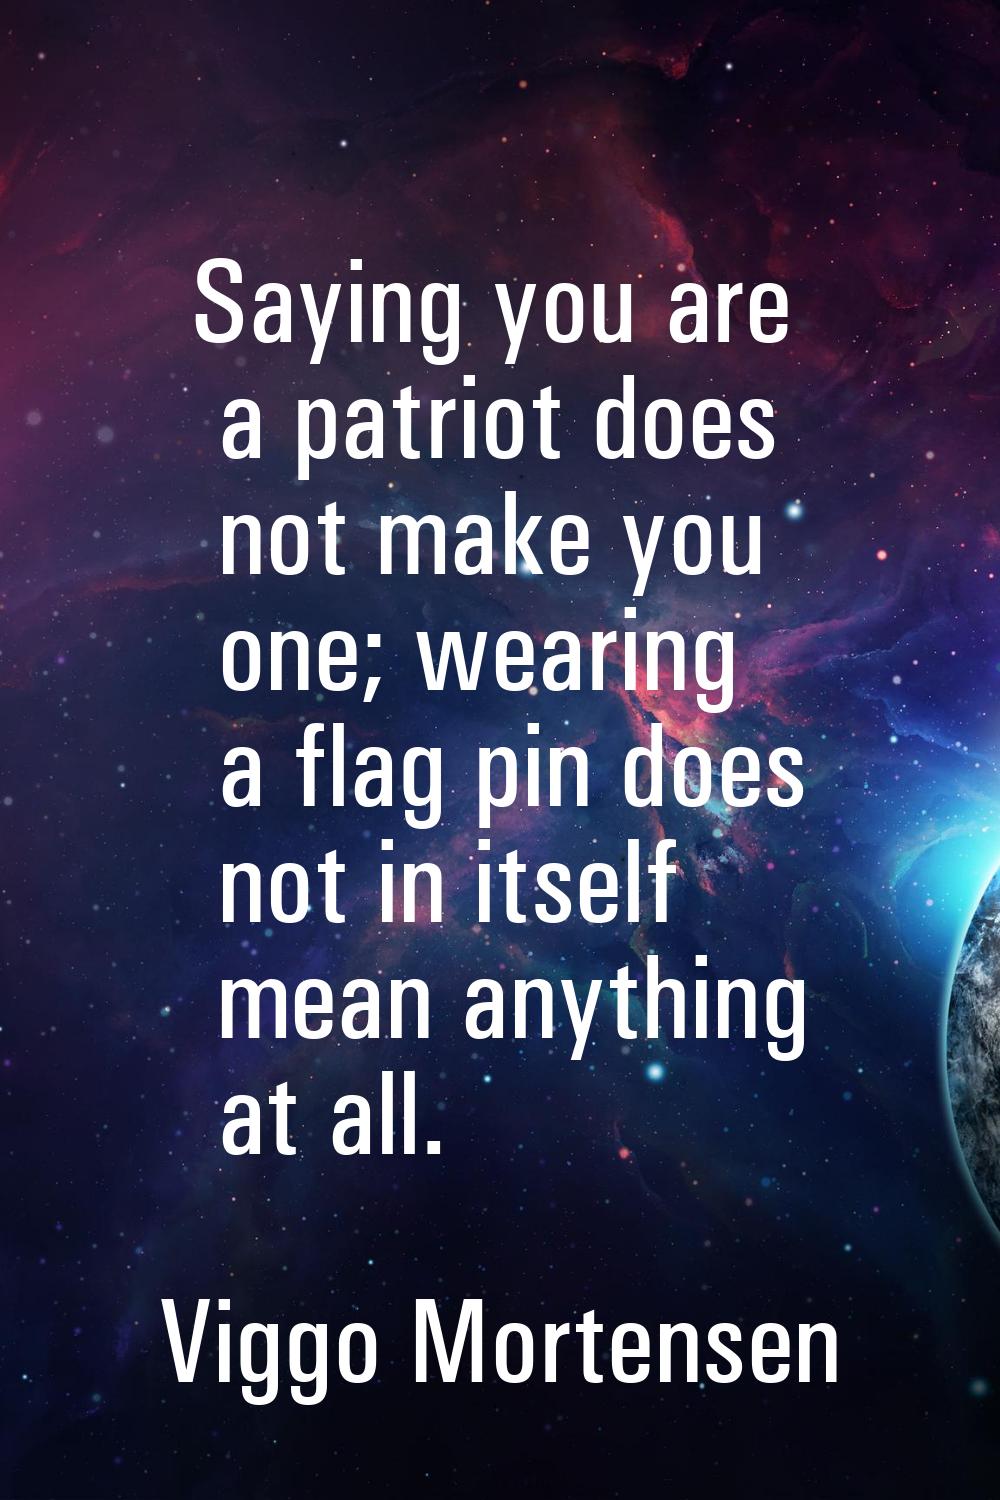 Saying you are a patriot does not make you one; wearing a flag pin does not in itself mean anything